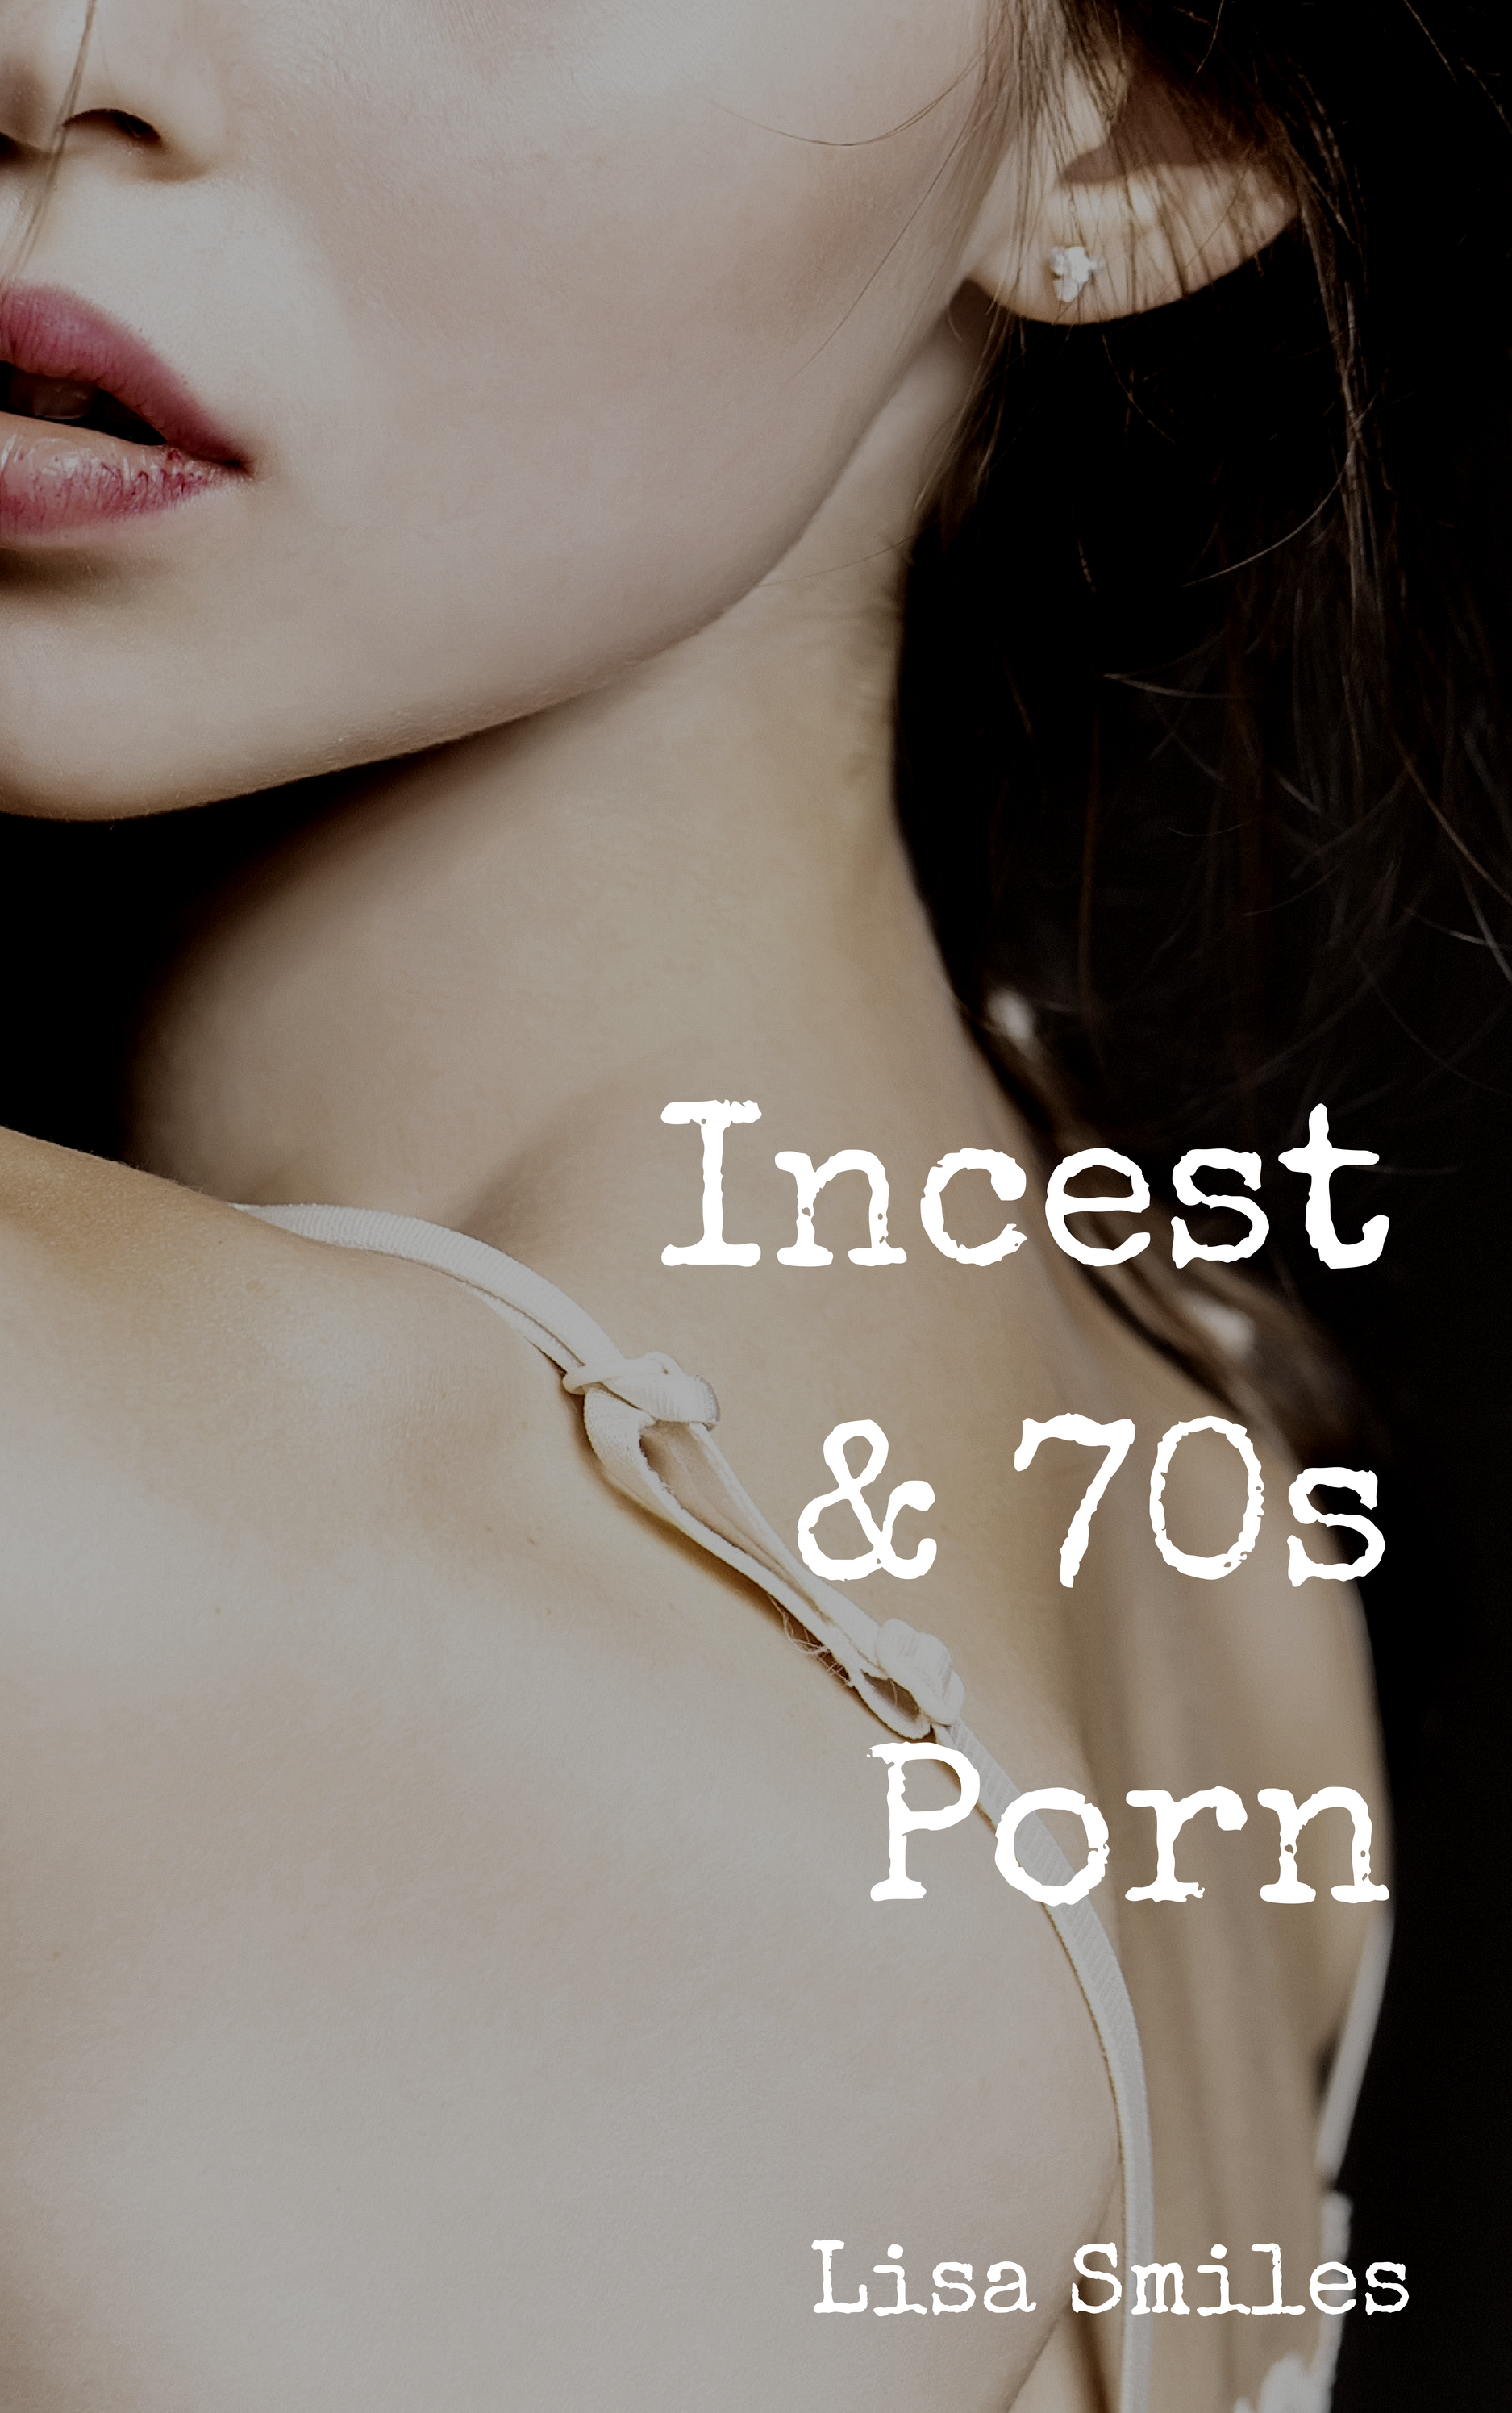 Book Porn From The 70s - Incest & 70s Porn, an Ebook by Lisa Smiles